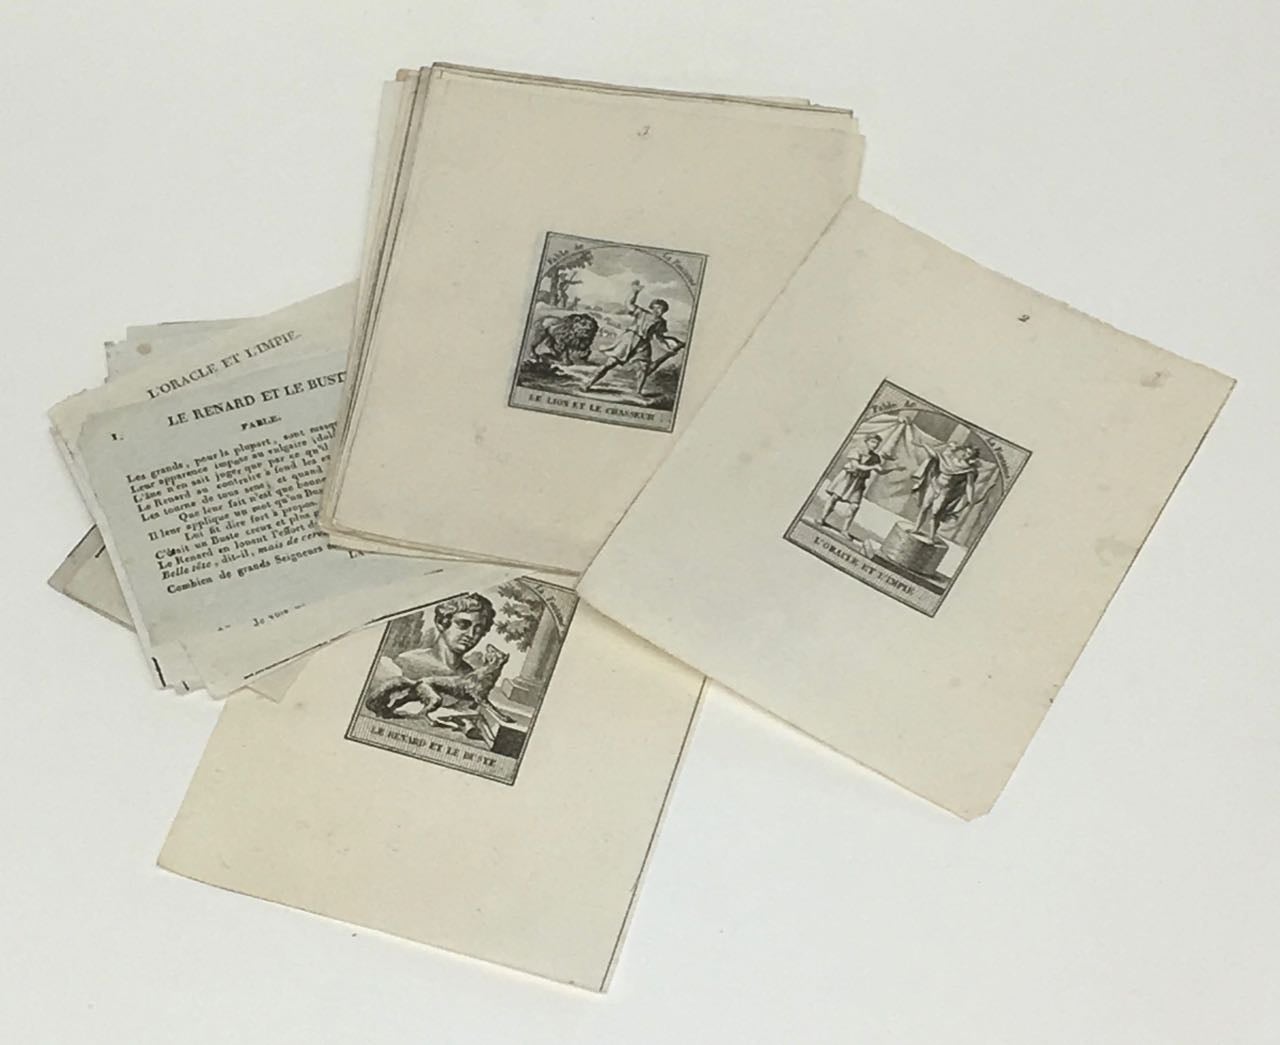 Item #6446 [Suite of Sixteen Chocolate Box Trade Cards with accompanying engraved plates]. Trade cards – Chocolate box cards, Jean de La Fontaine, Abbé Aubert.